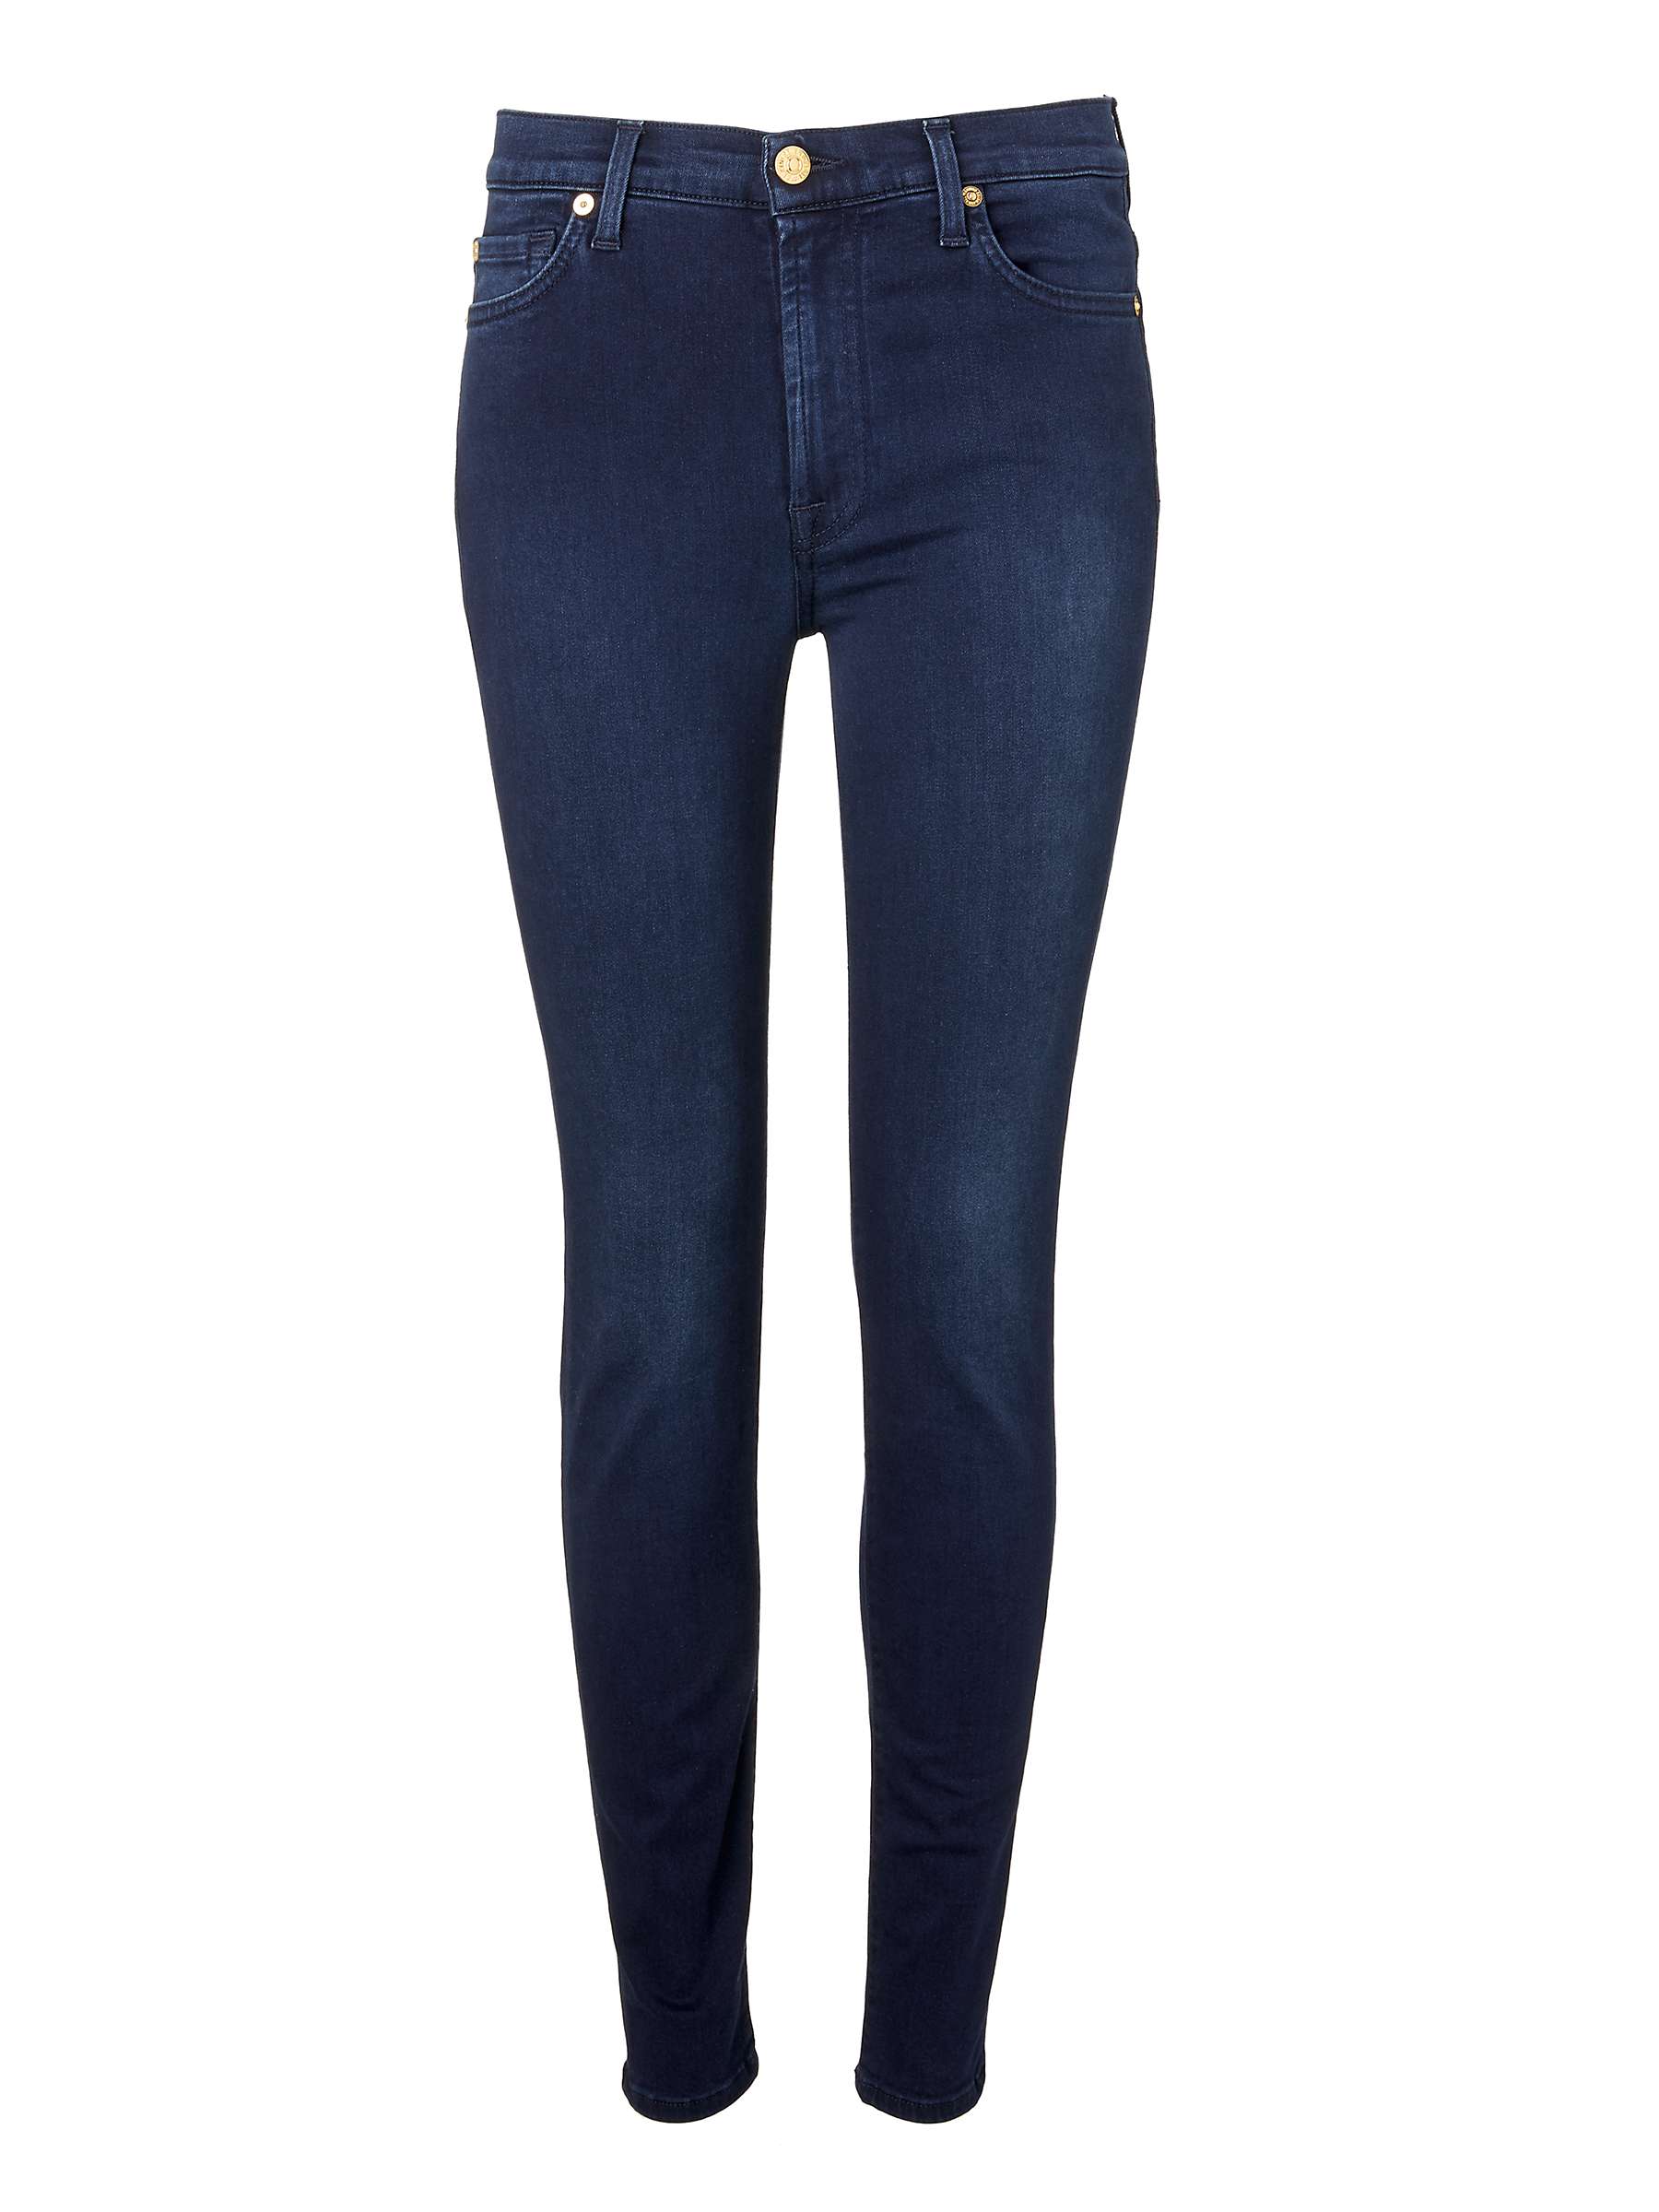 7 For All Mankind Slim Illusion Luxe Jeans, Rich Indigo at John Lewis ...